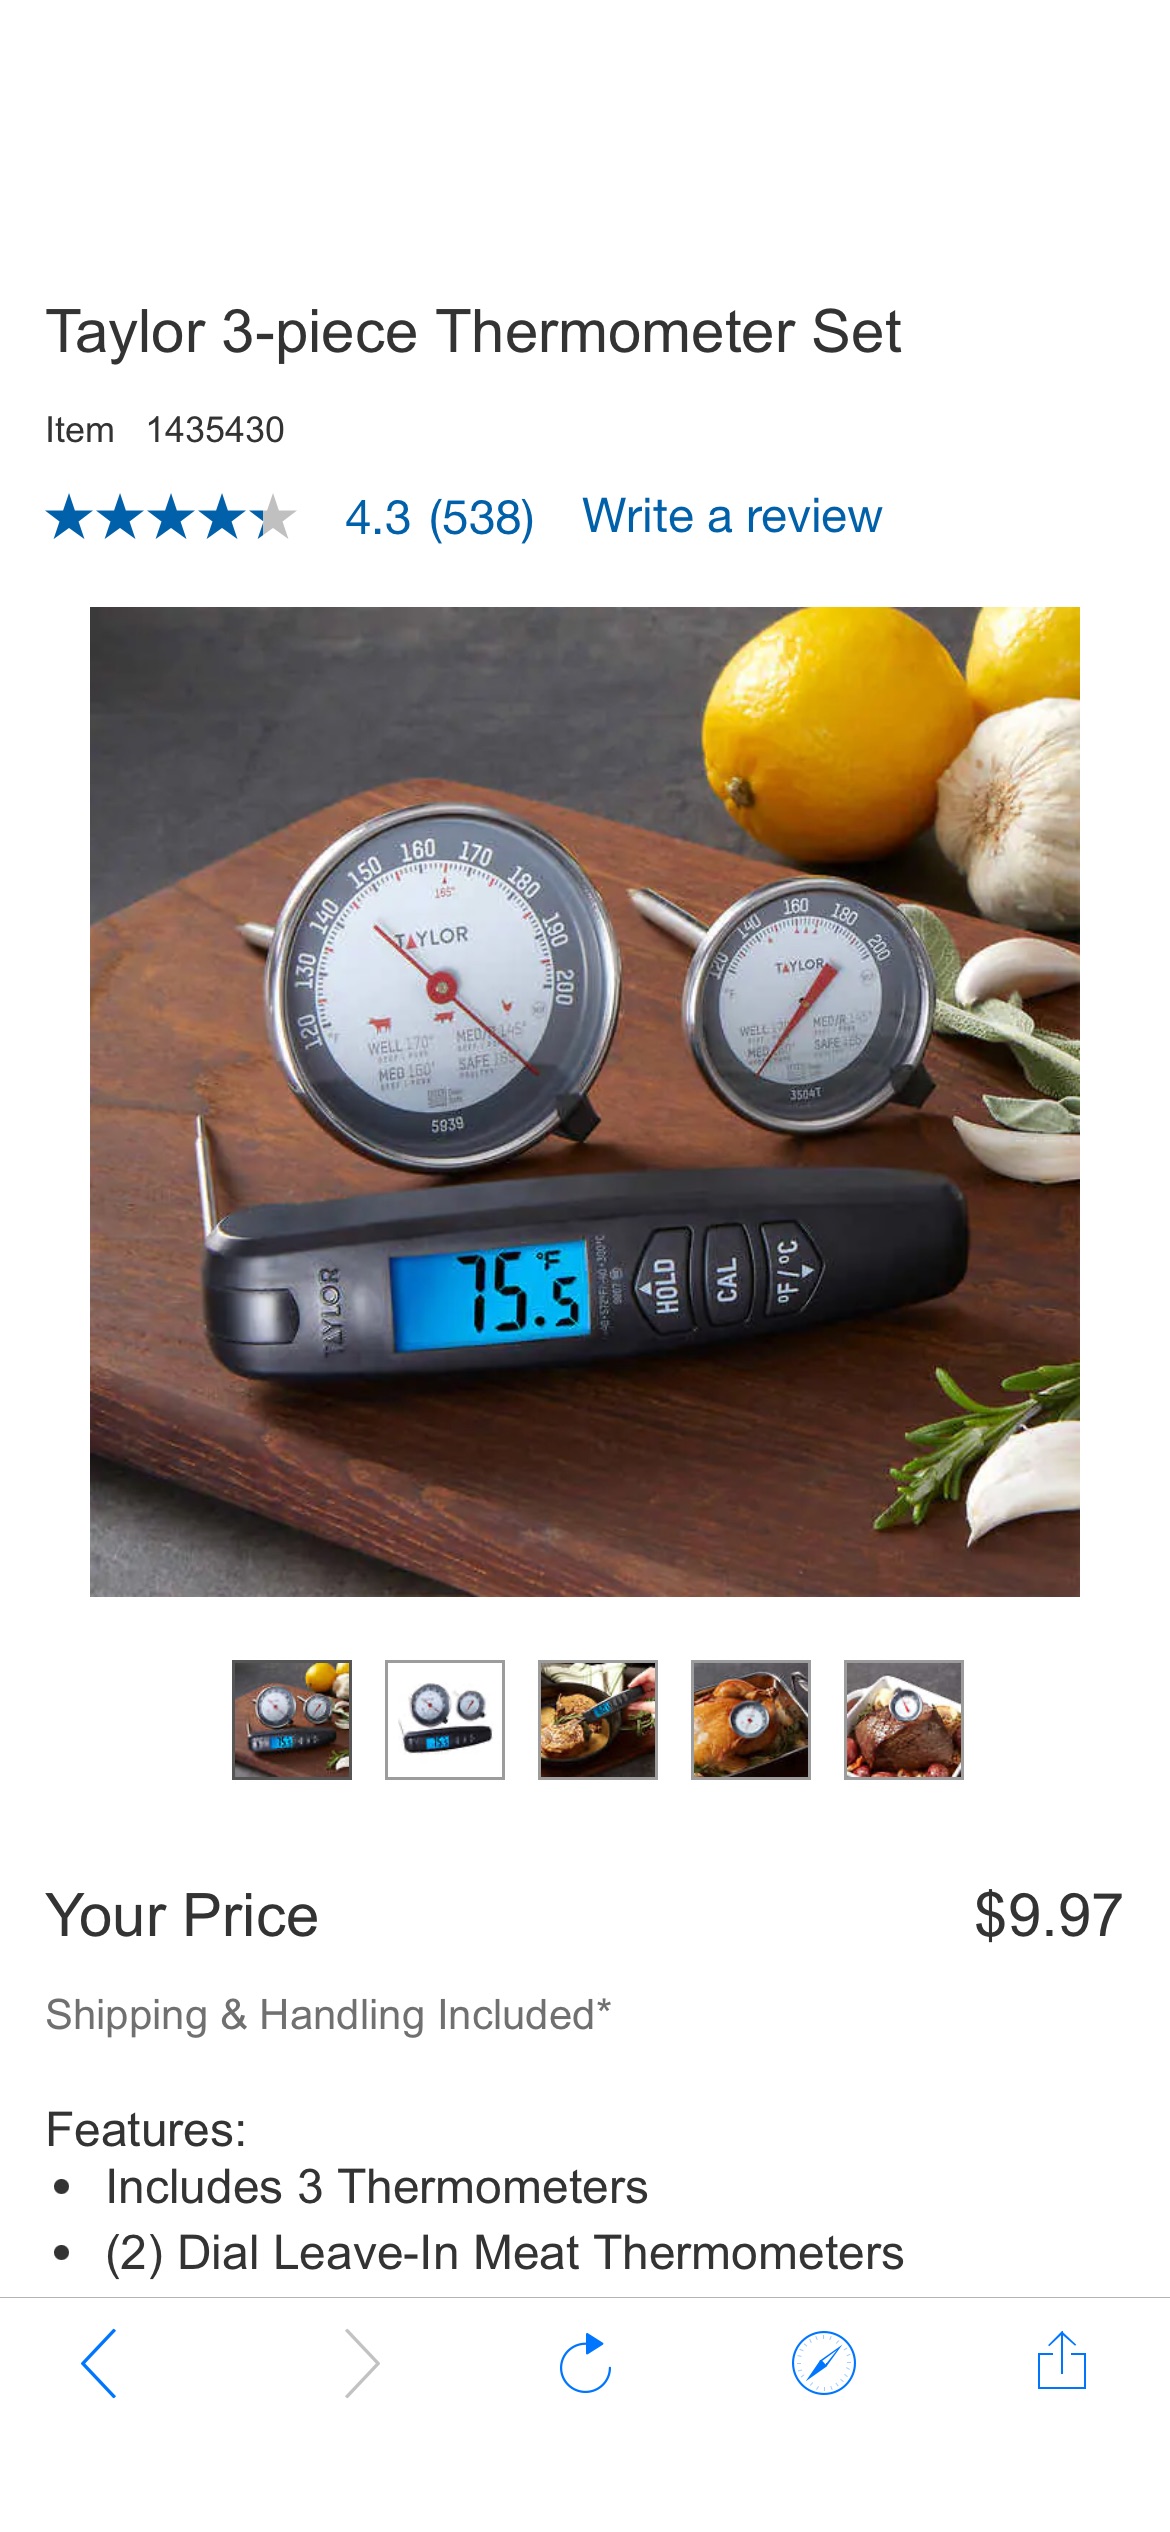 Taylor 3-piece Thermometer Set | Costco 厨房烹饪温度计